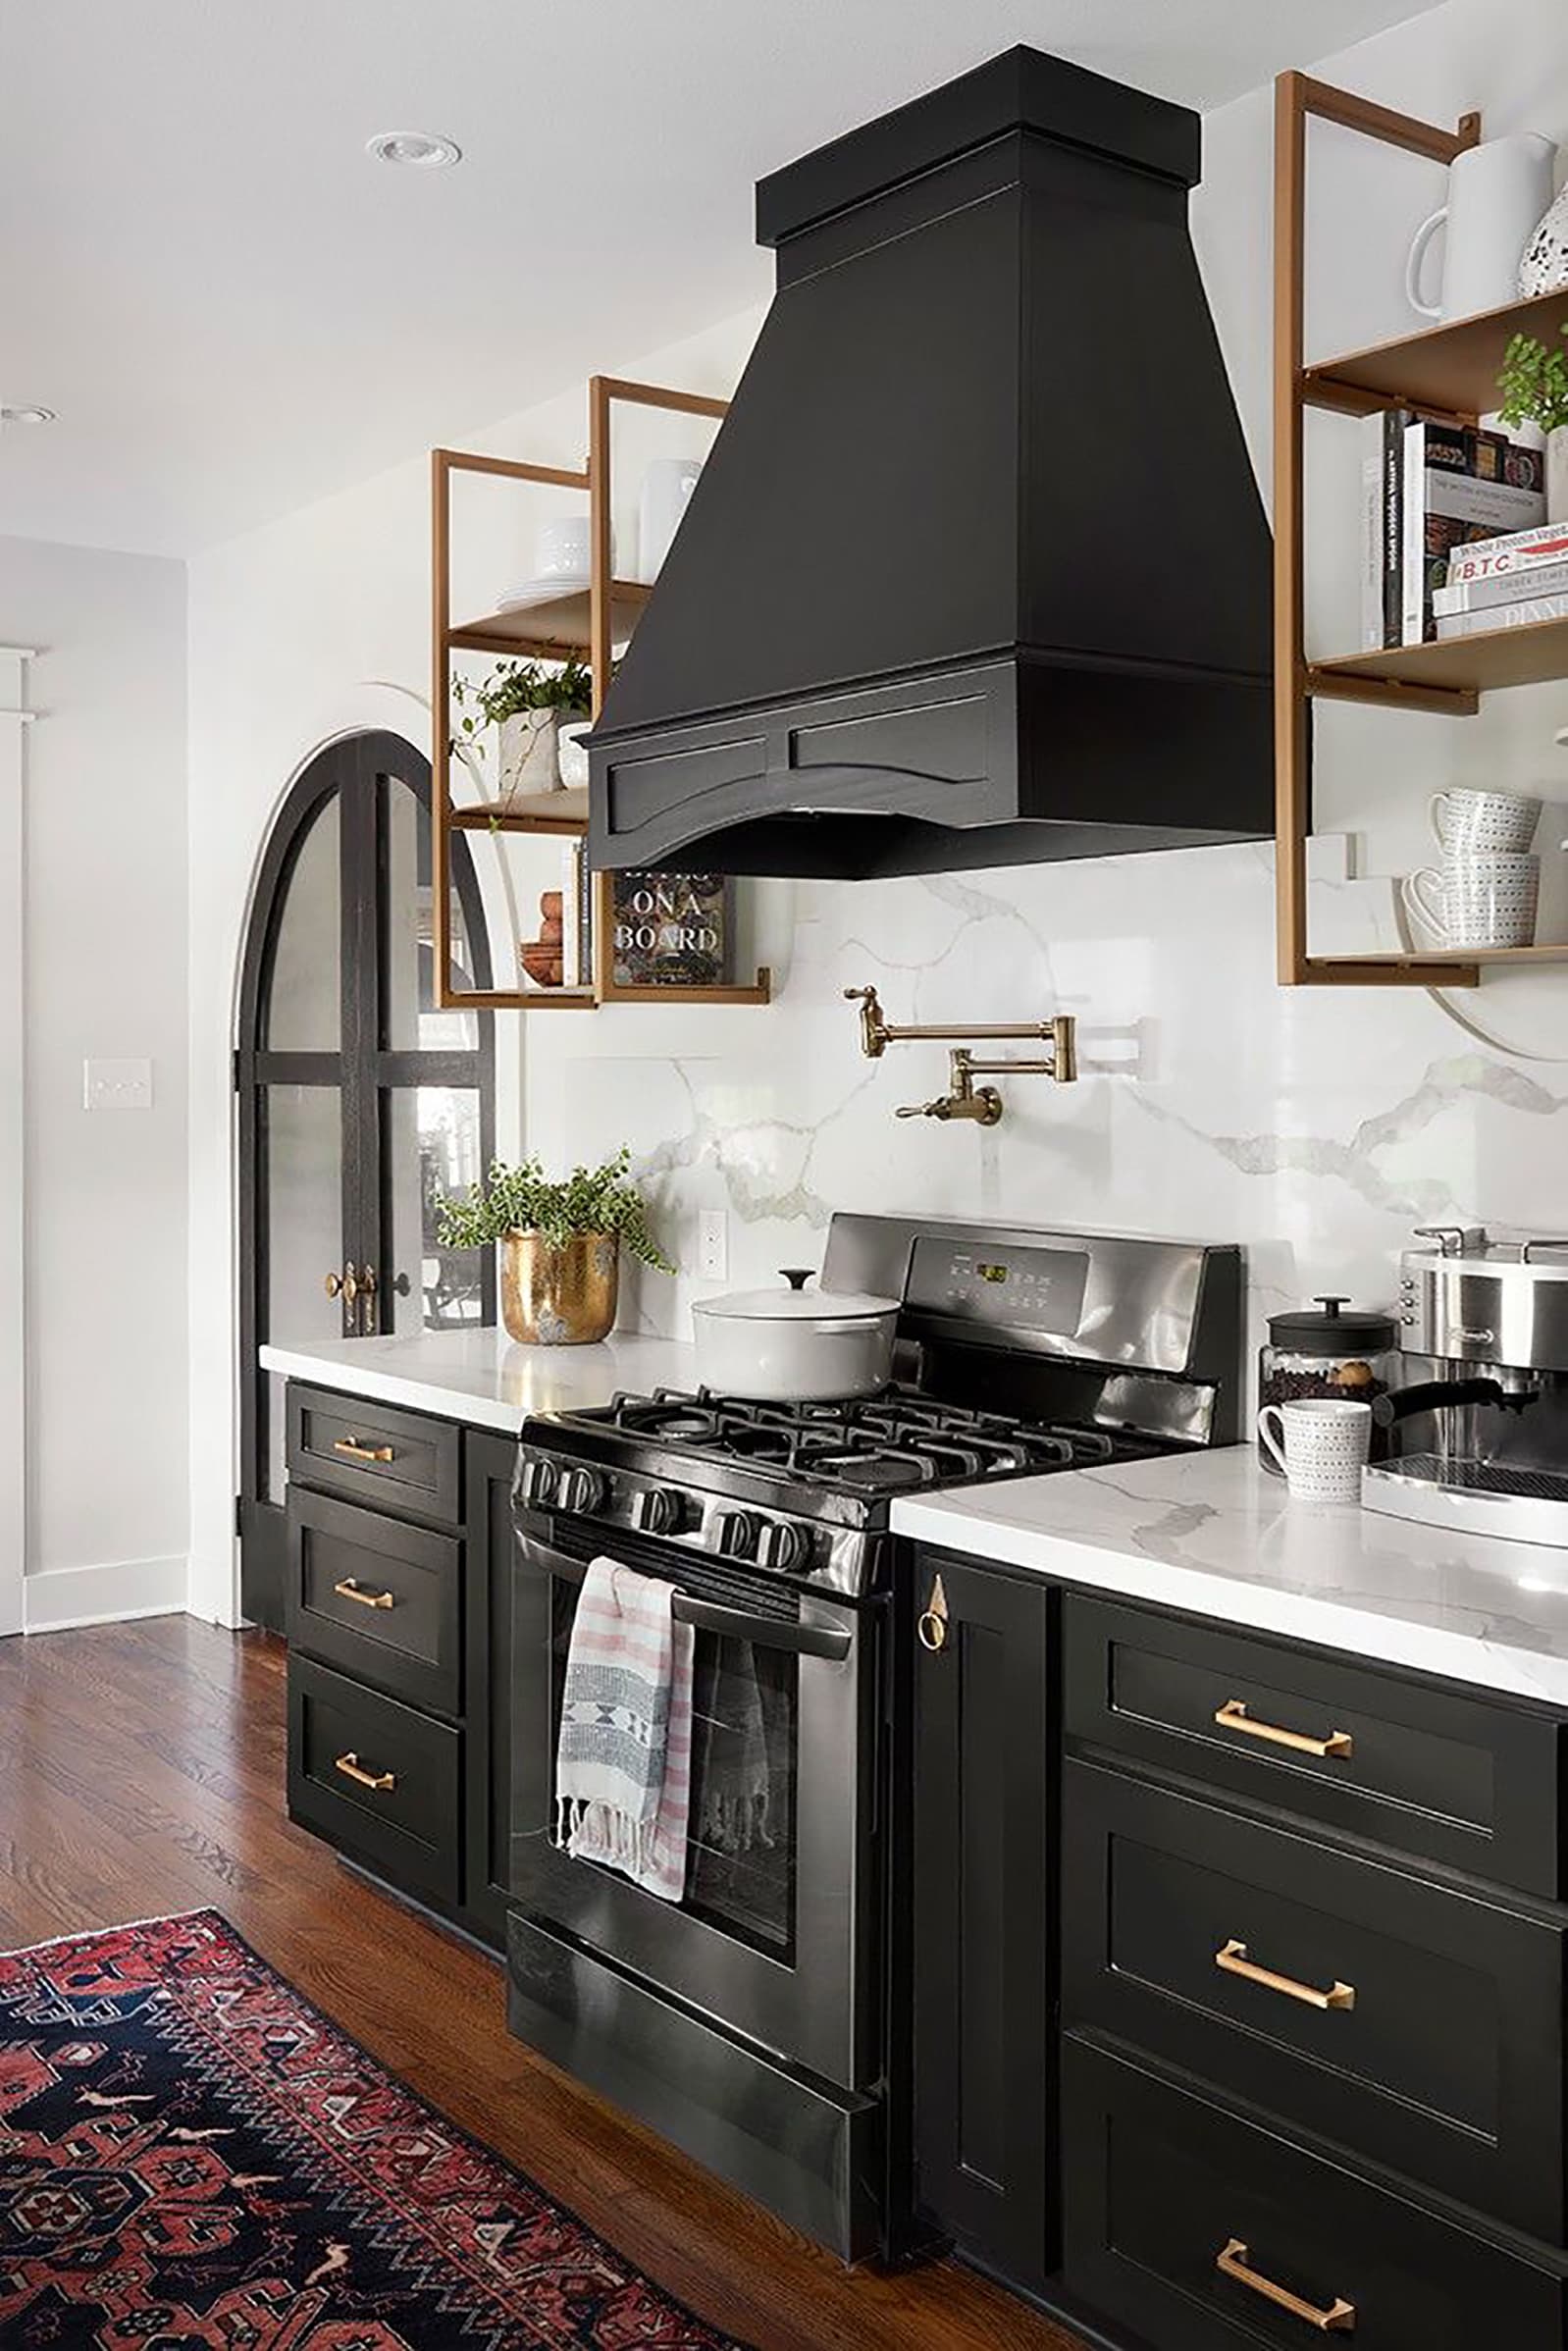 Black kitchen cabinets with gold hardware and white quartz counters